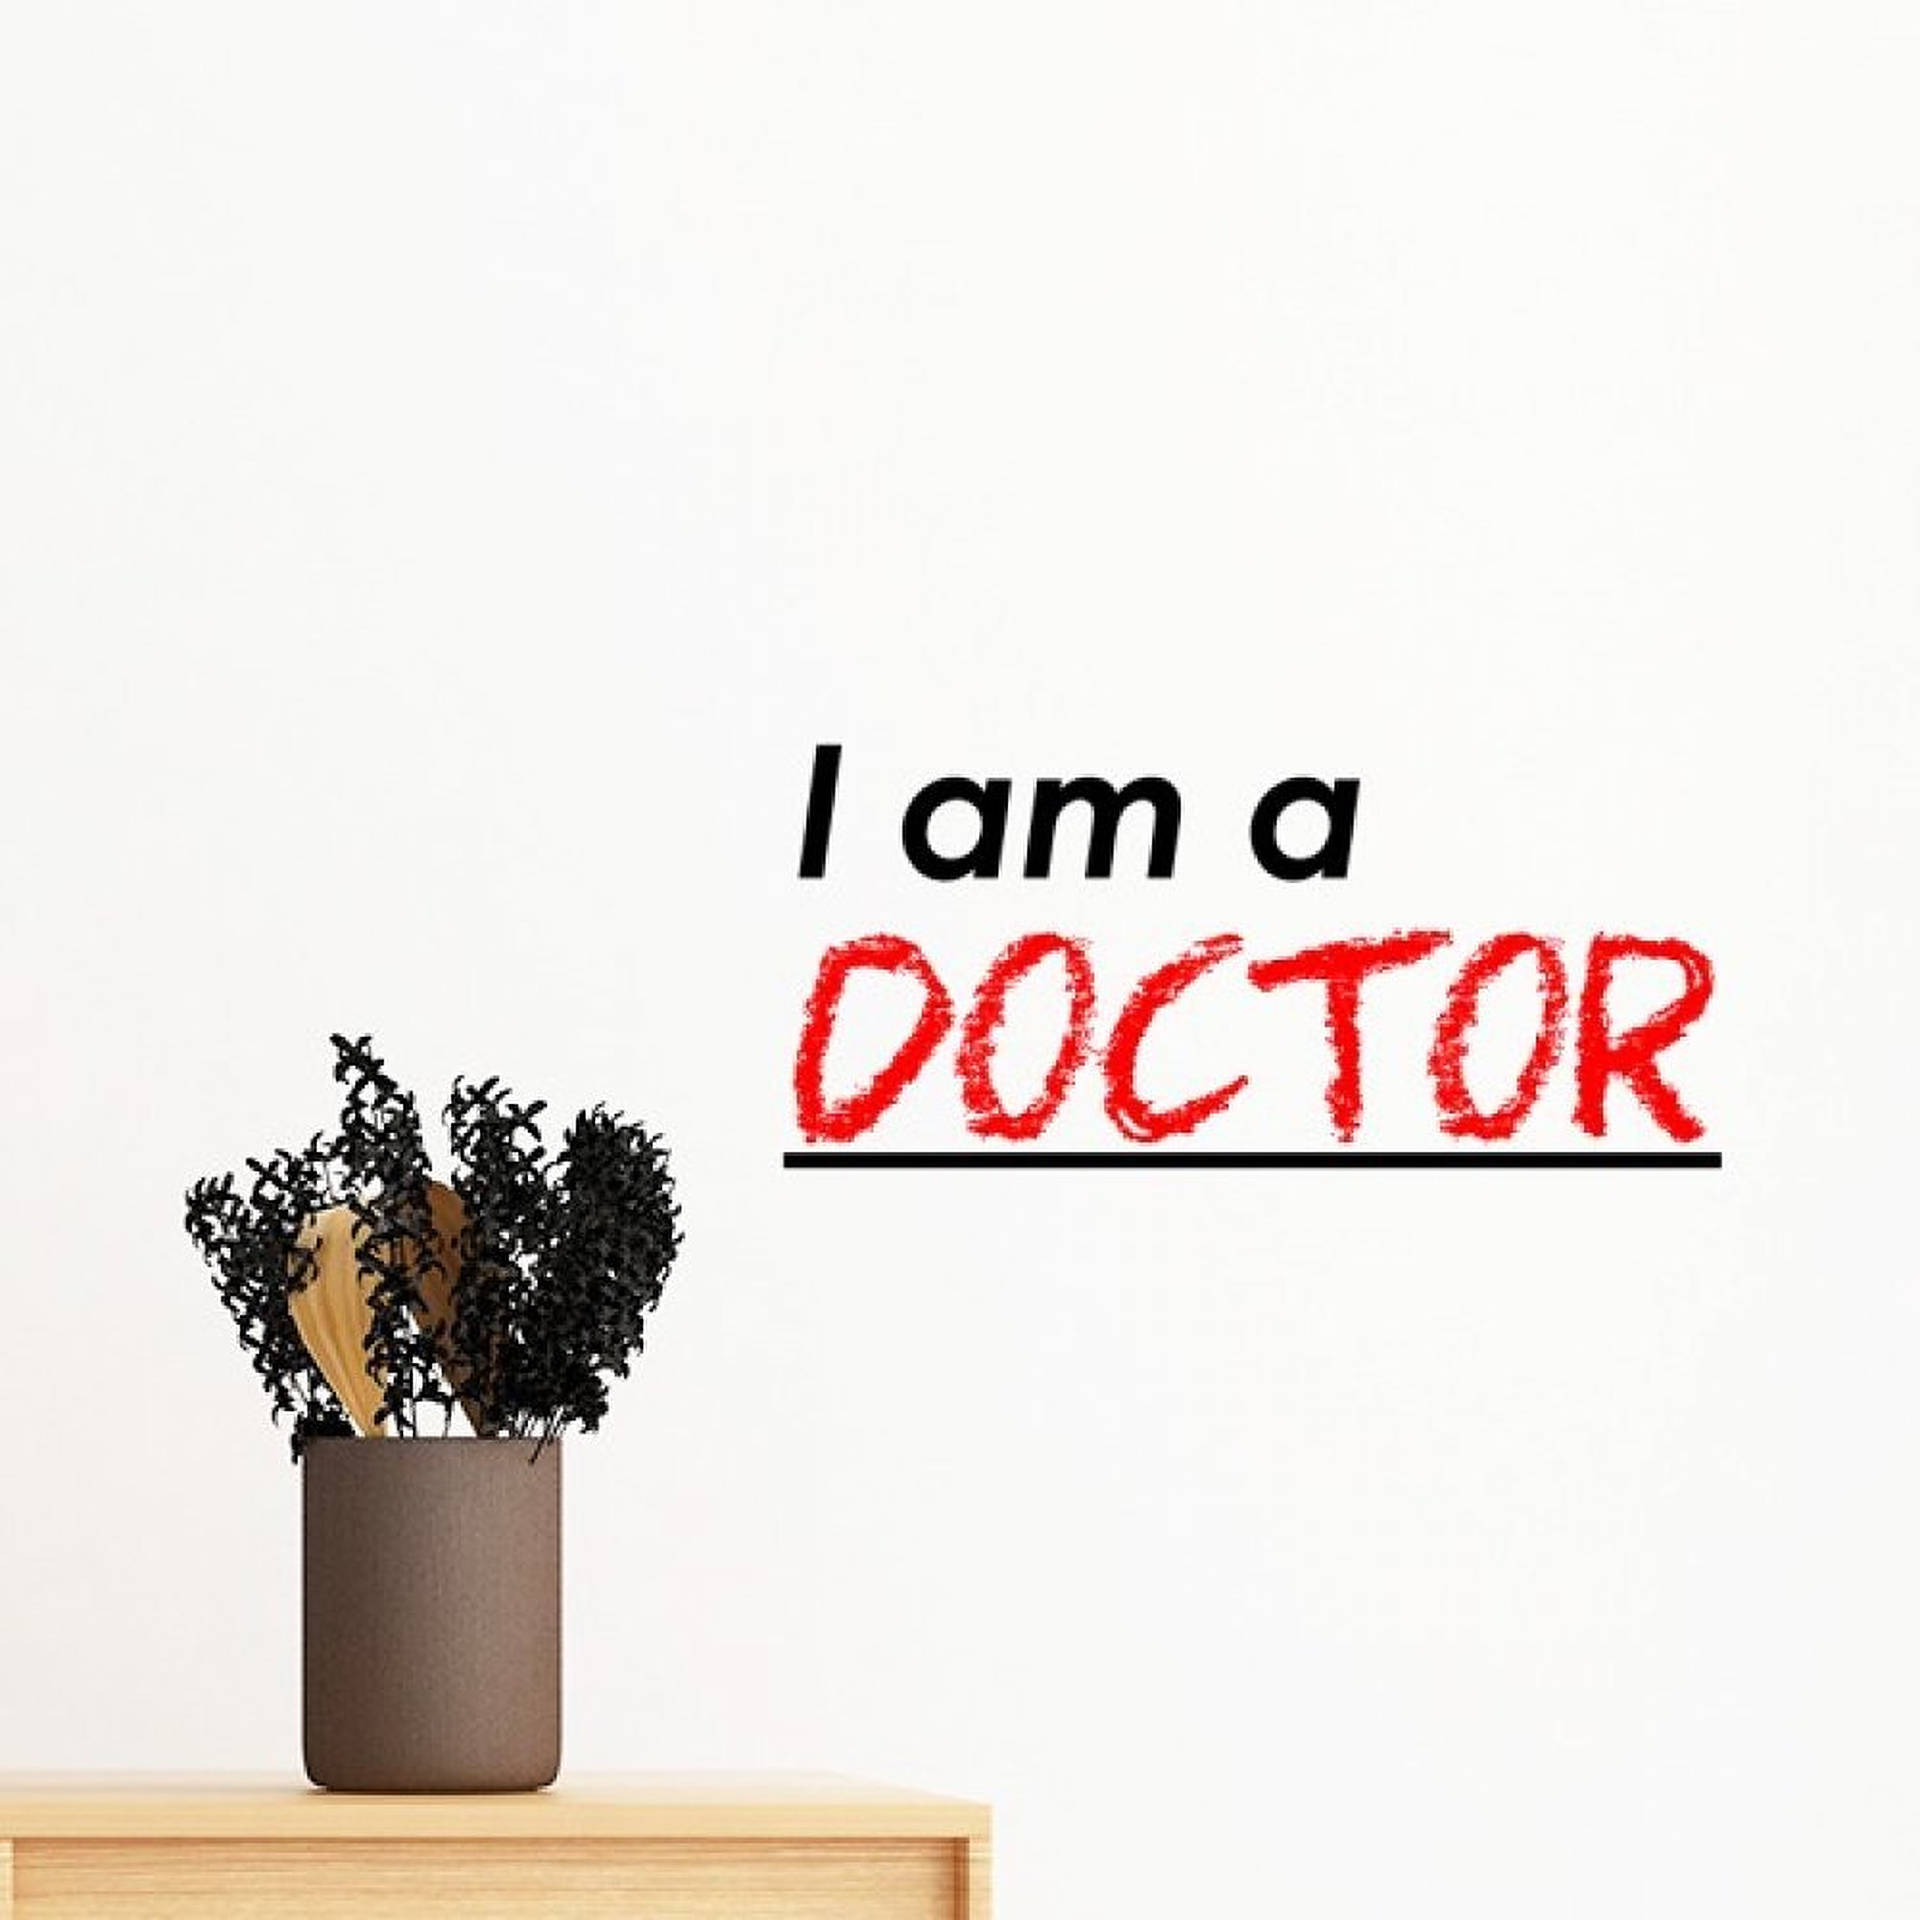 Confident Medical Professional - Standout in Stethoscope Wallpaper